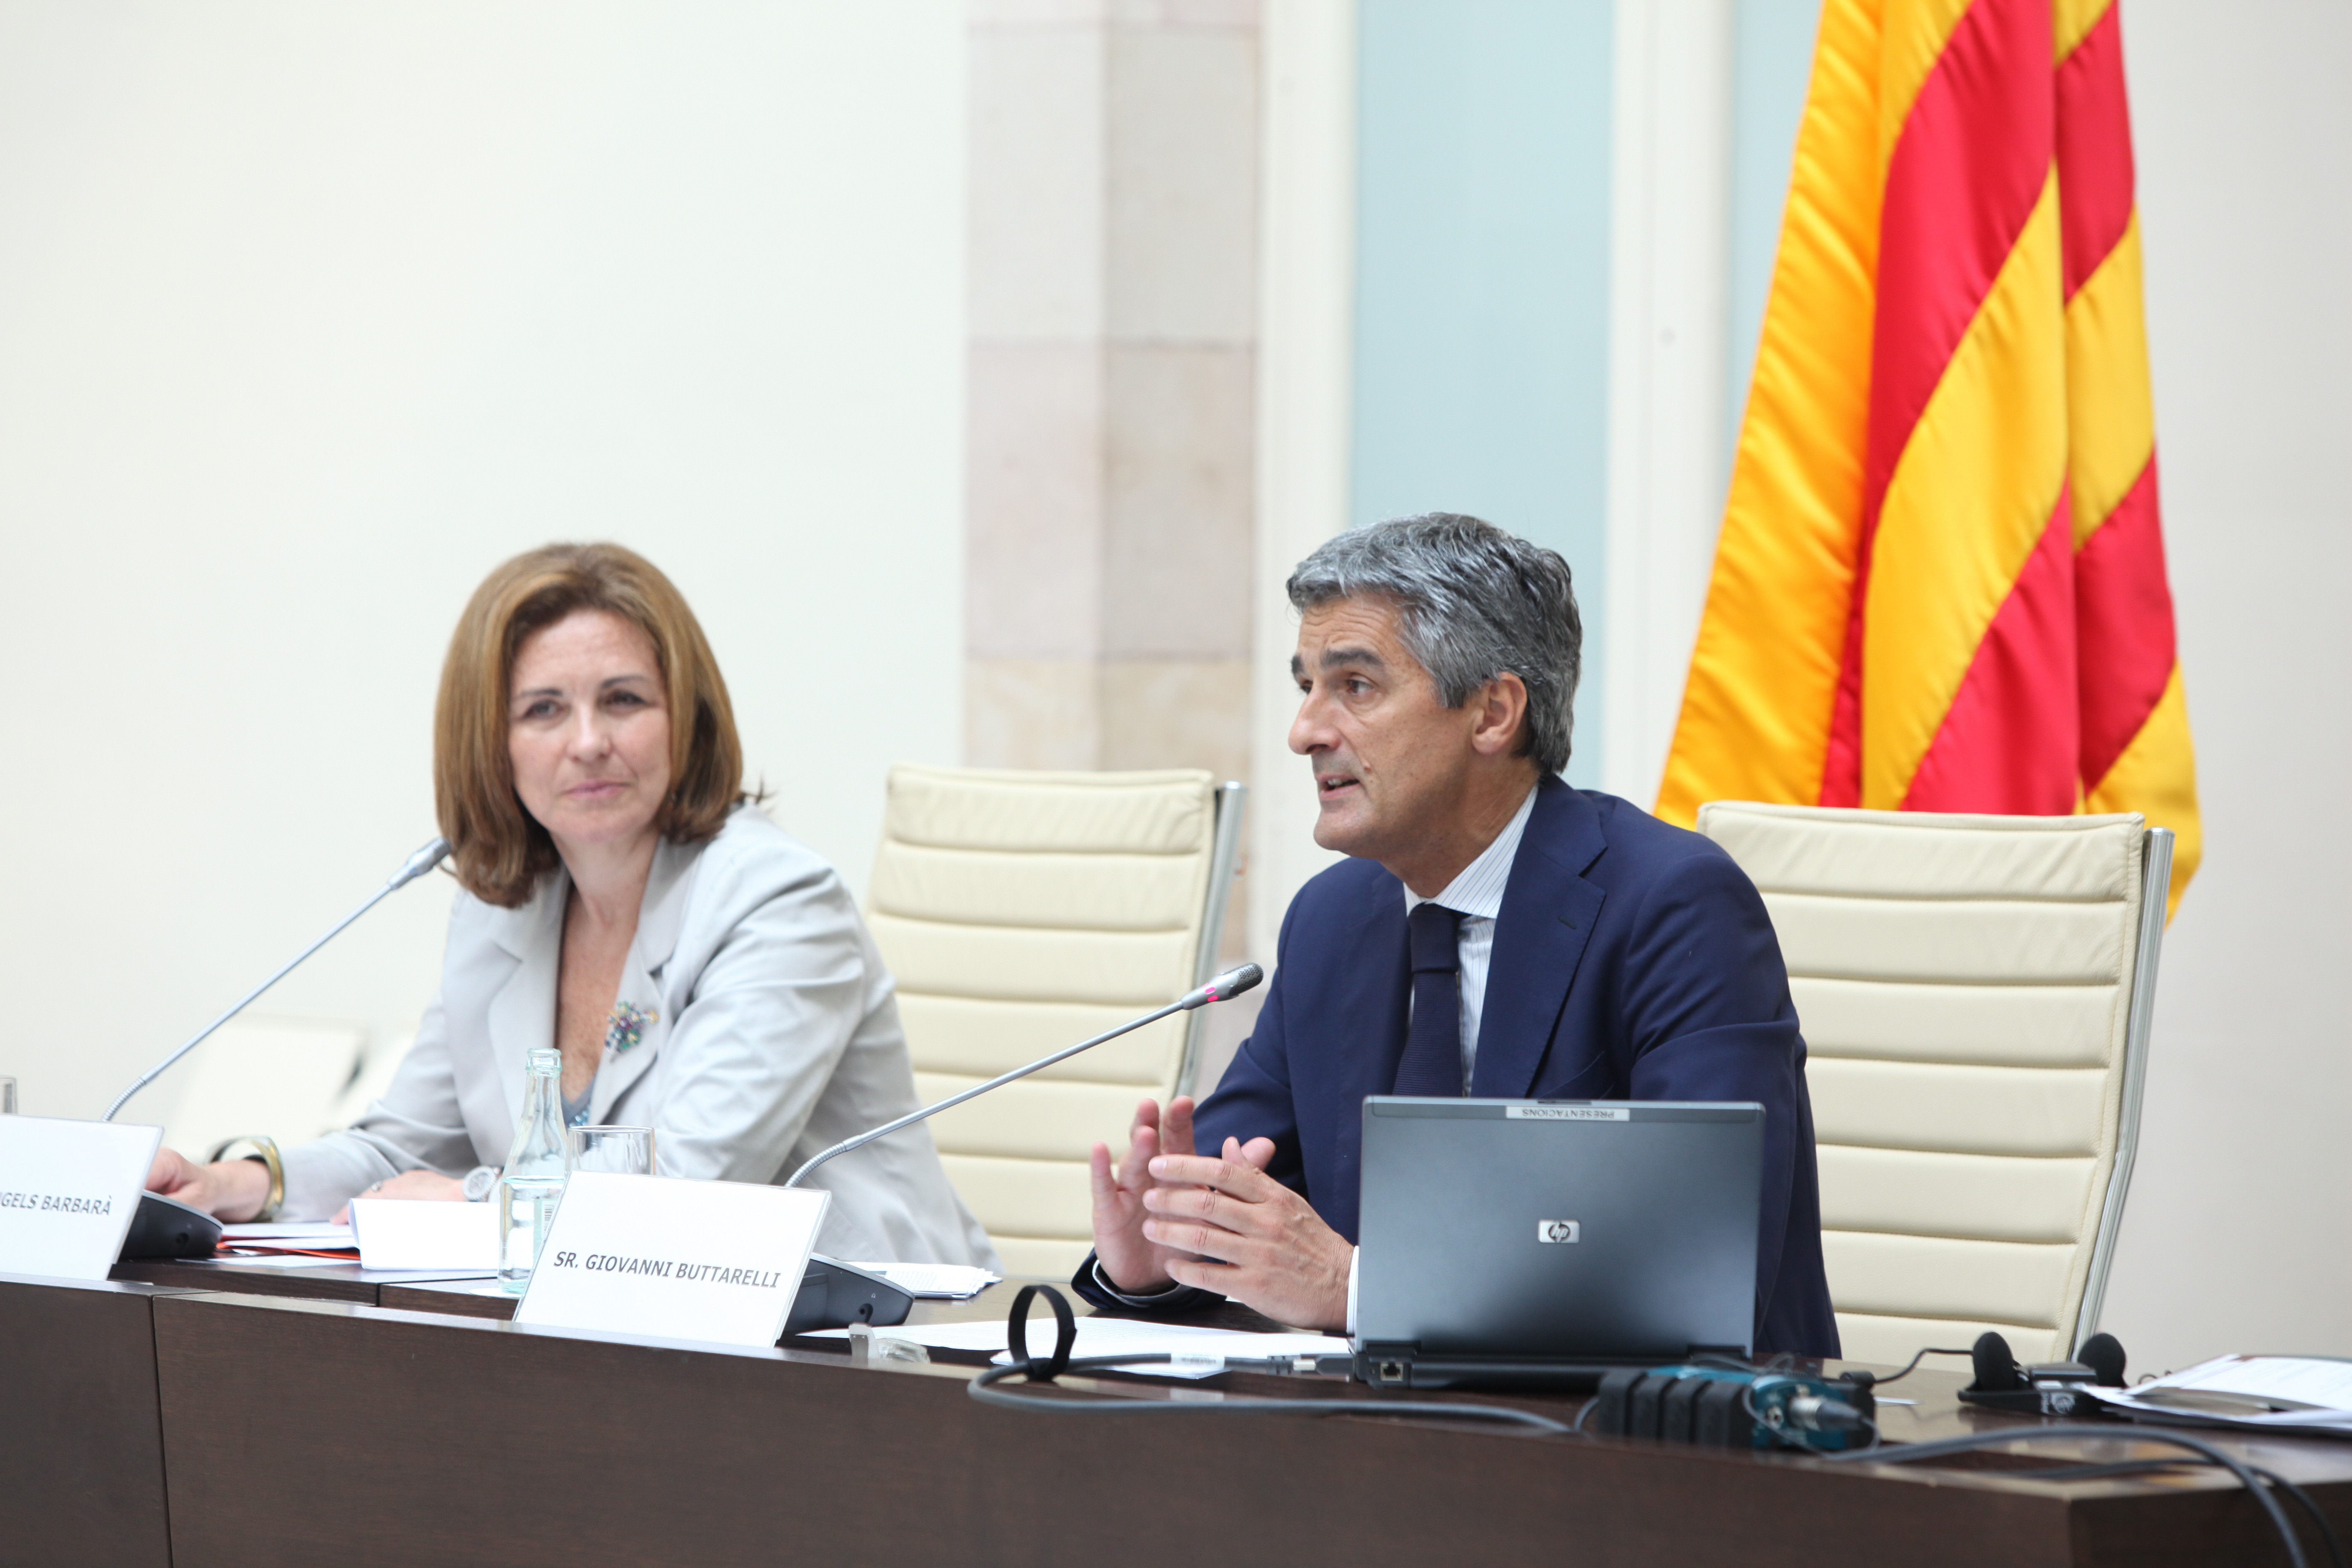 Mrs. M. Àngels Barbarà, director of the APDCAT and Mr. Giovanni Buttarelli, attached European supervisor of Protection of Data